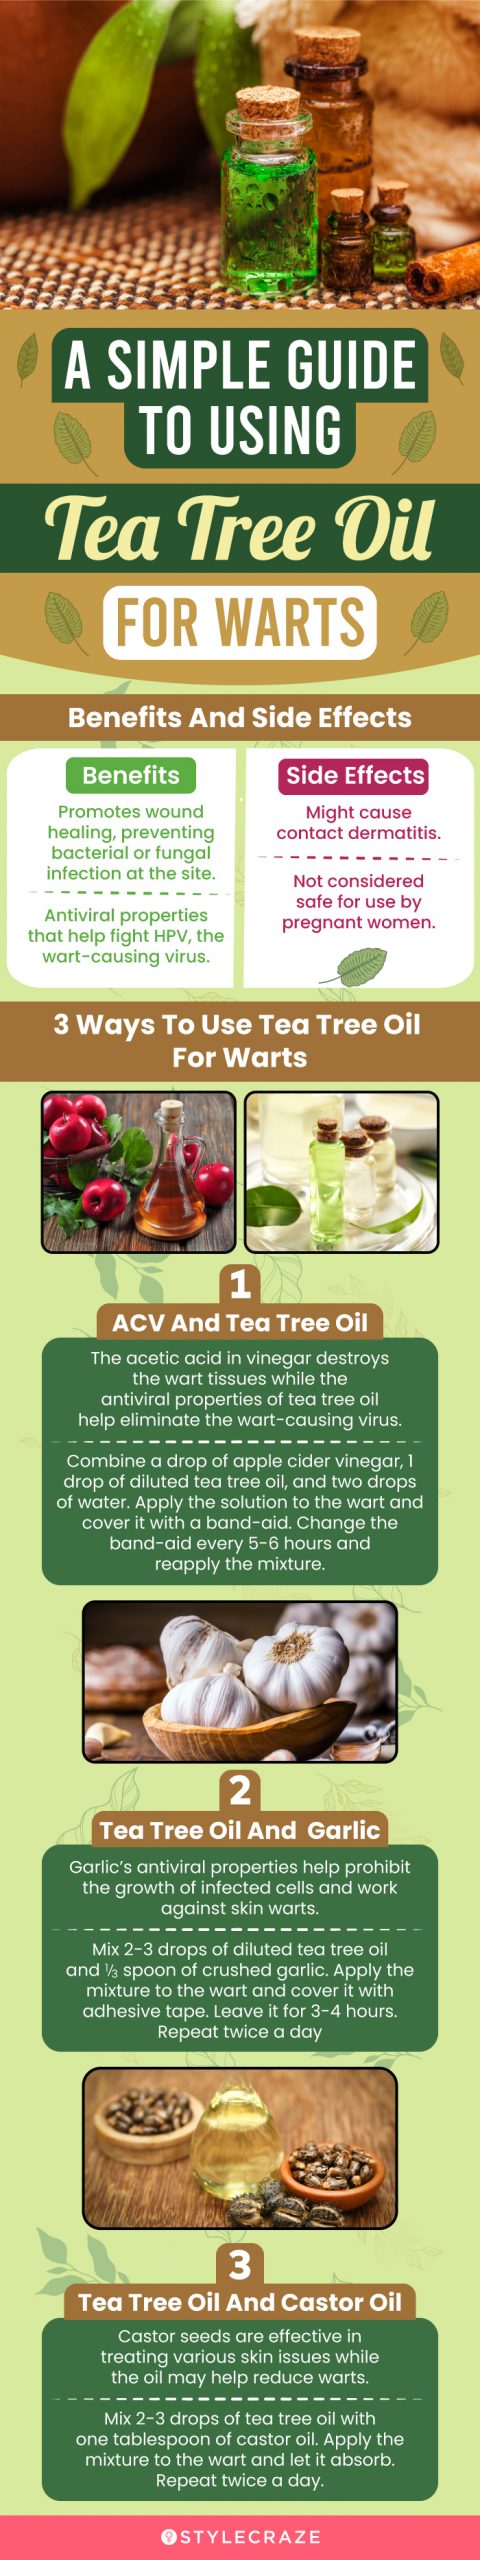 a simple guide to using tea tree oil for warts (infographic)